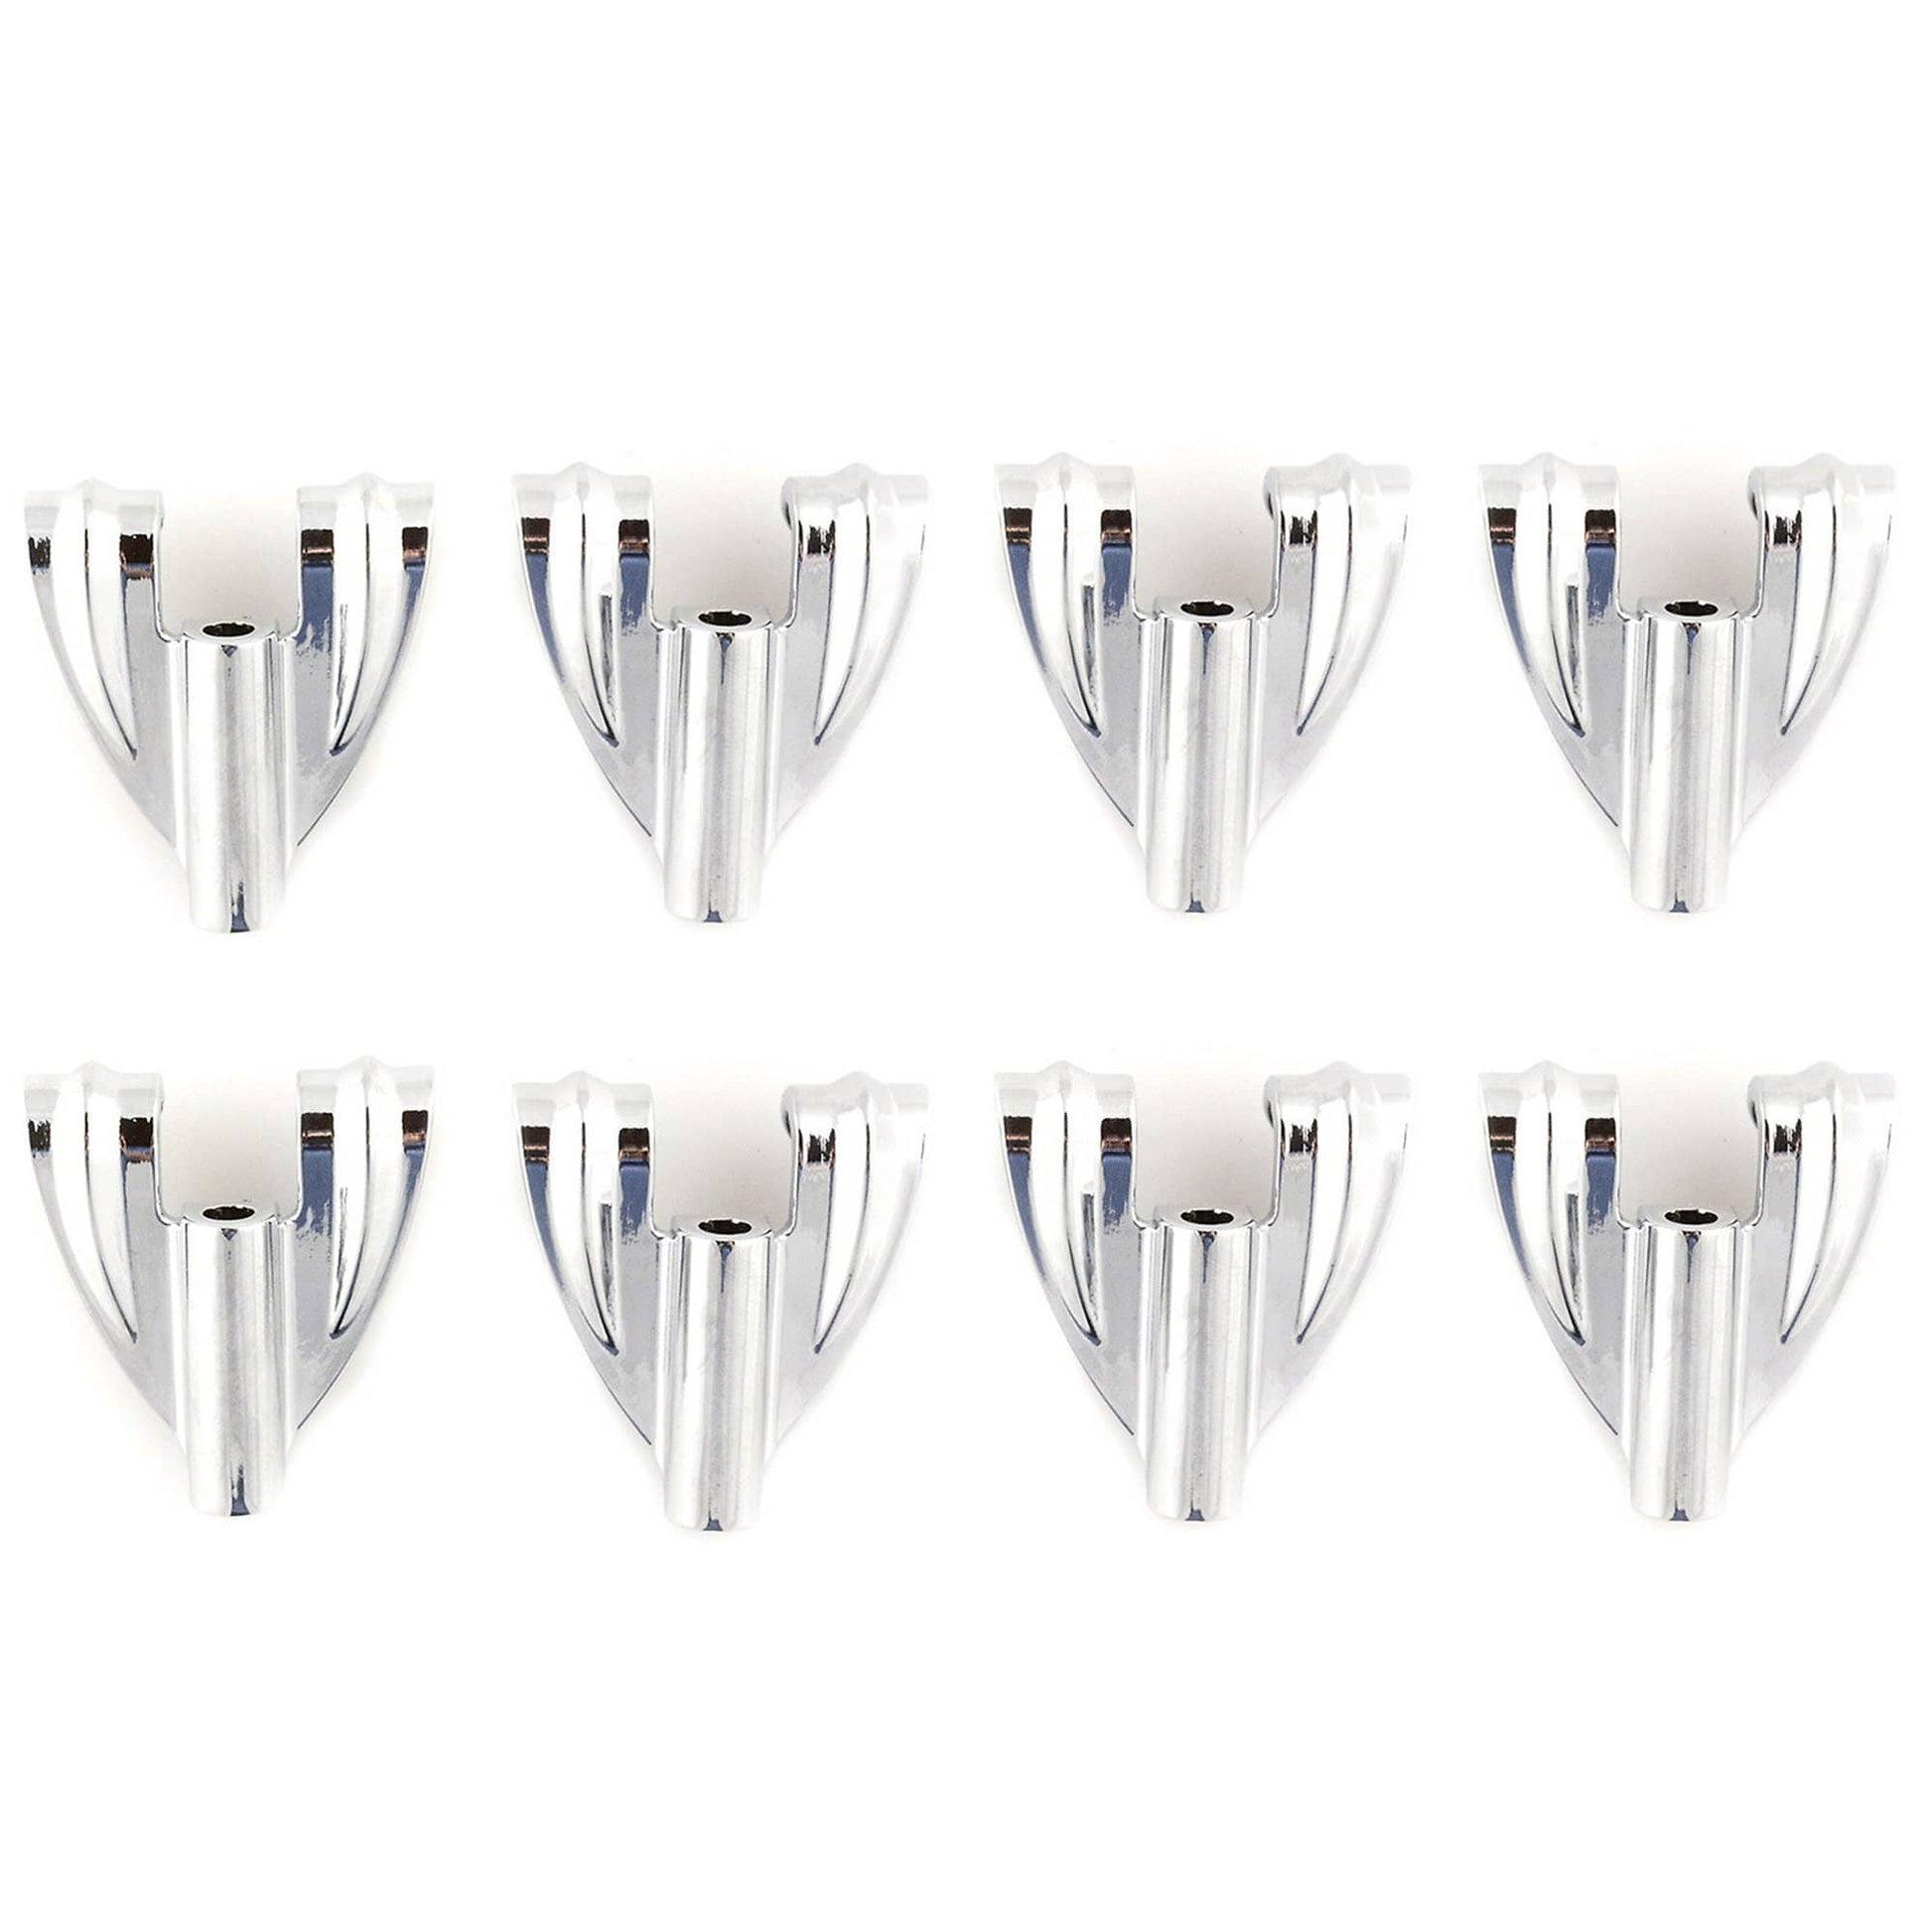 Ludwig Classic Bass Drum Claw Hooks (8 Pack Bundle) Drums and Percussion / Parts and Accessories / Drum Parts